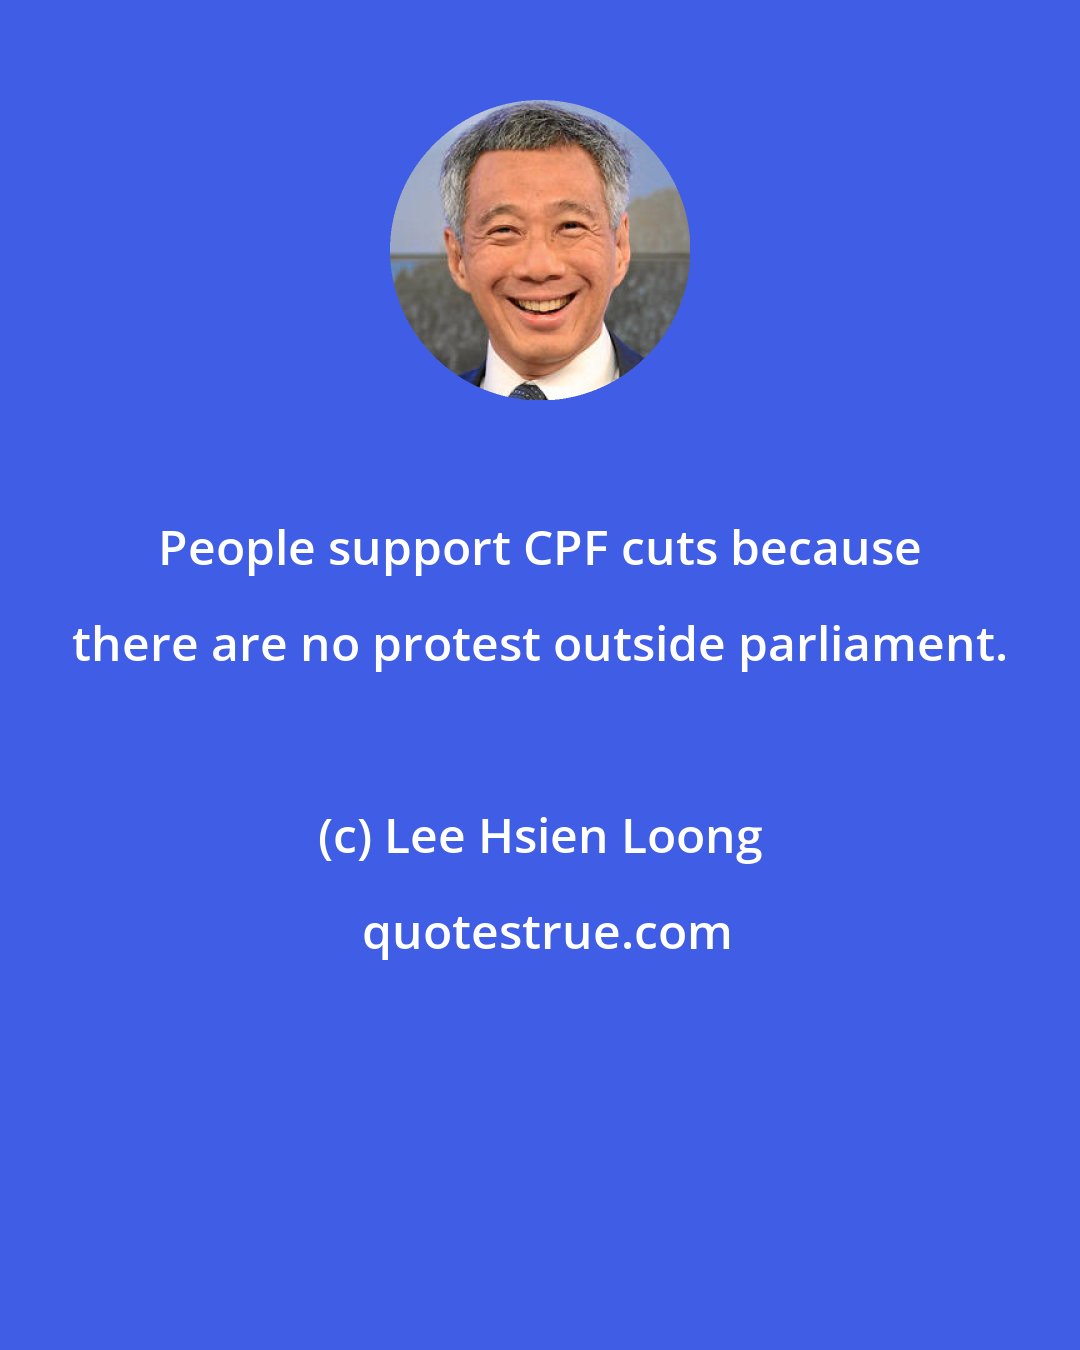 Lee Hsien Loong: People support CPF cuts because there are no protest outside parliament.